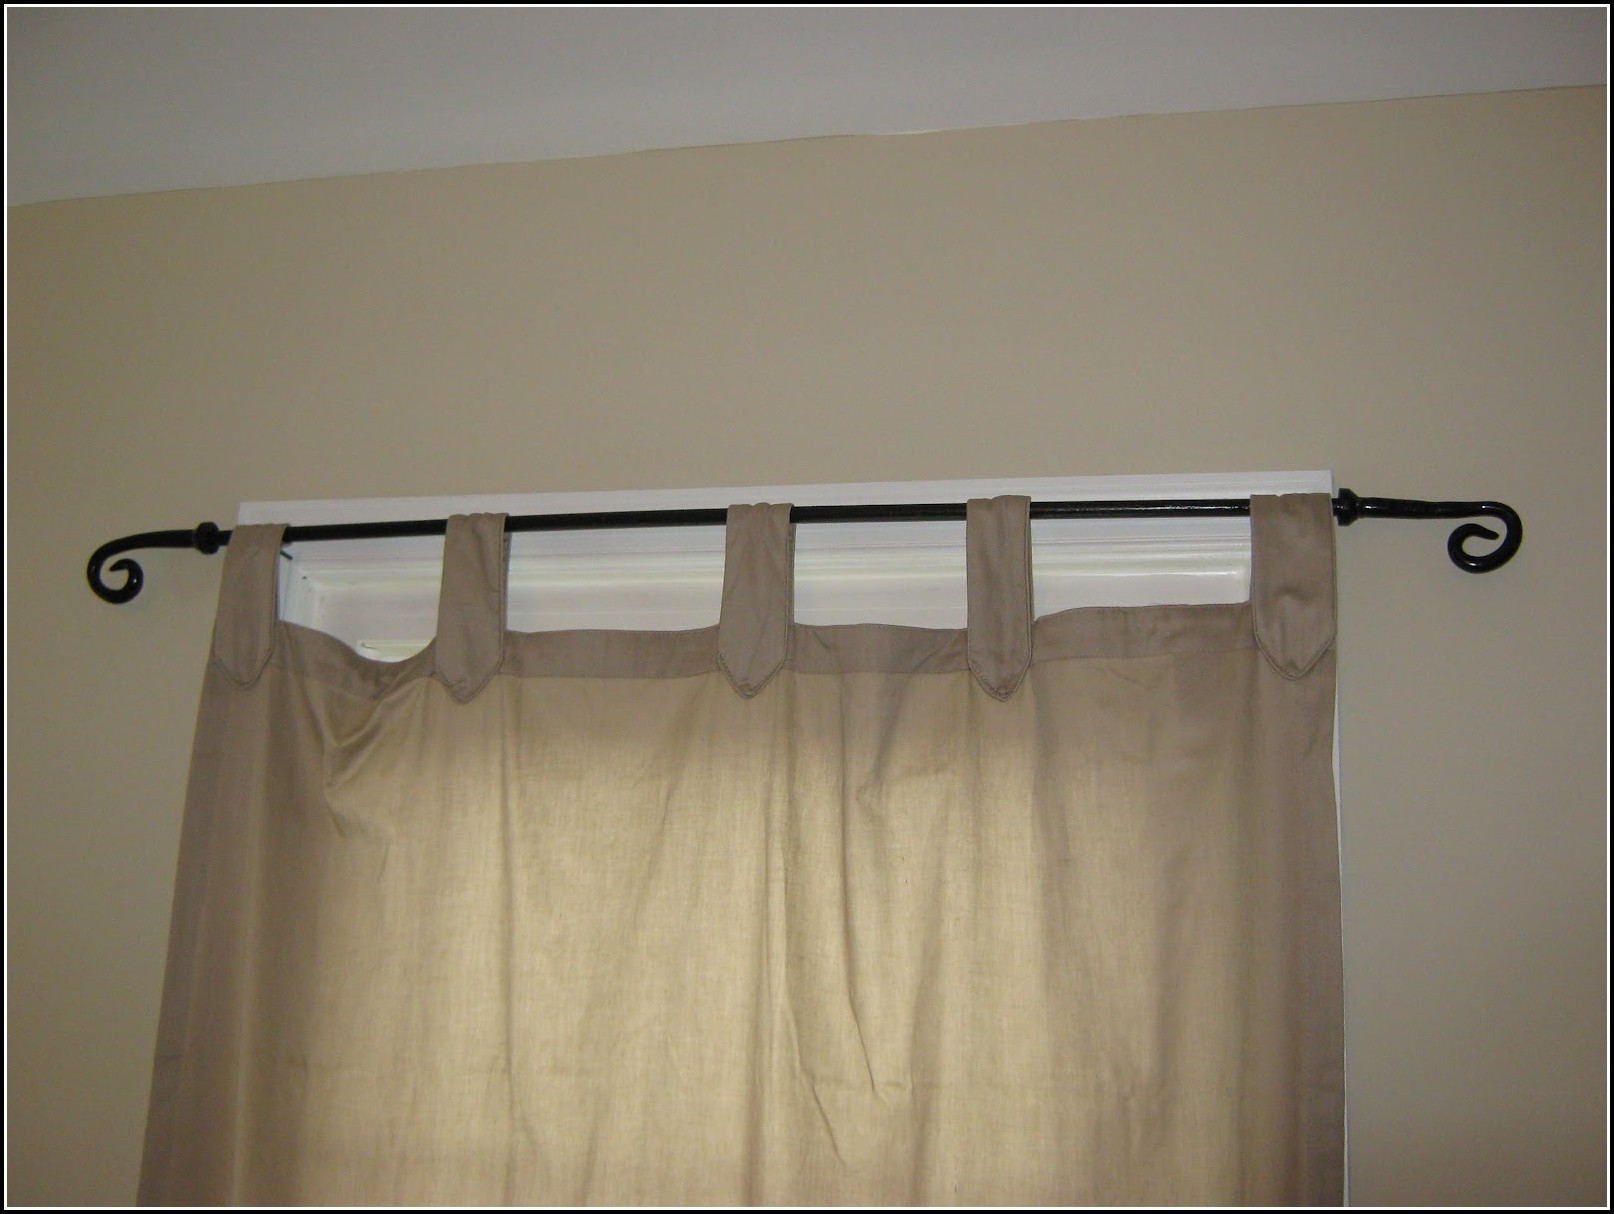 12 Foot Double Curtain Rods Download Page – Home Design Ideas Galleries  Home Design Ideas Guide!